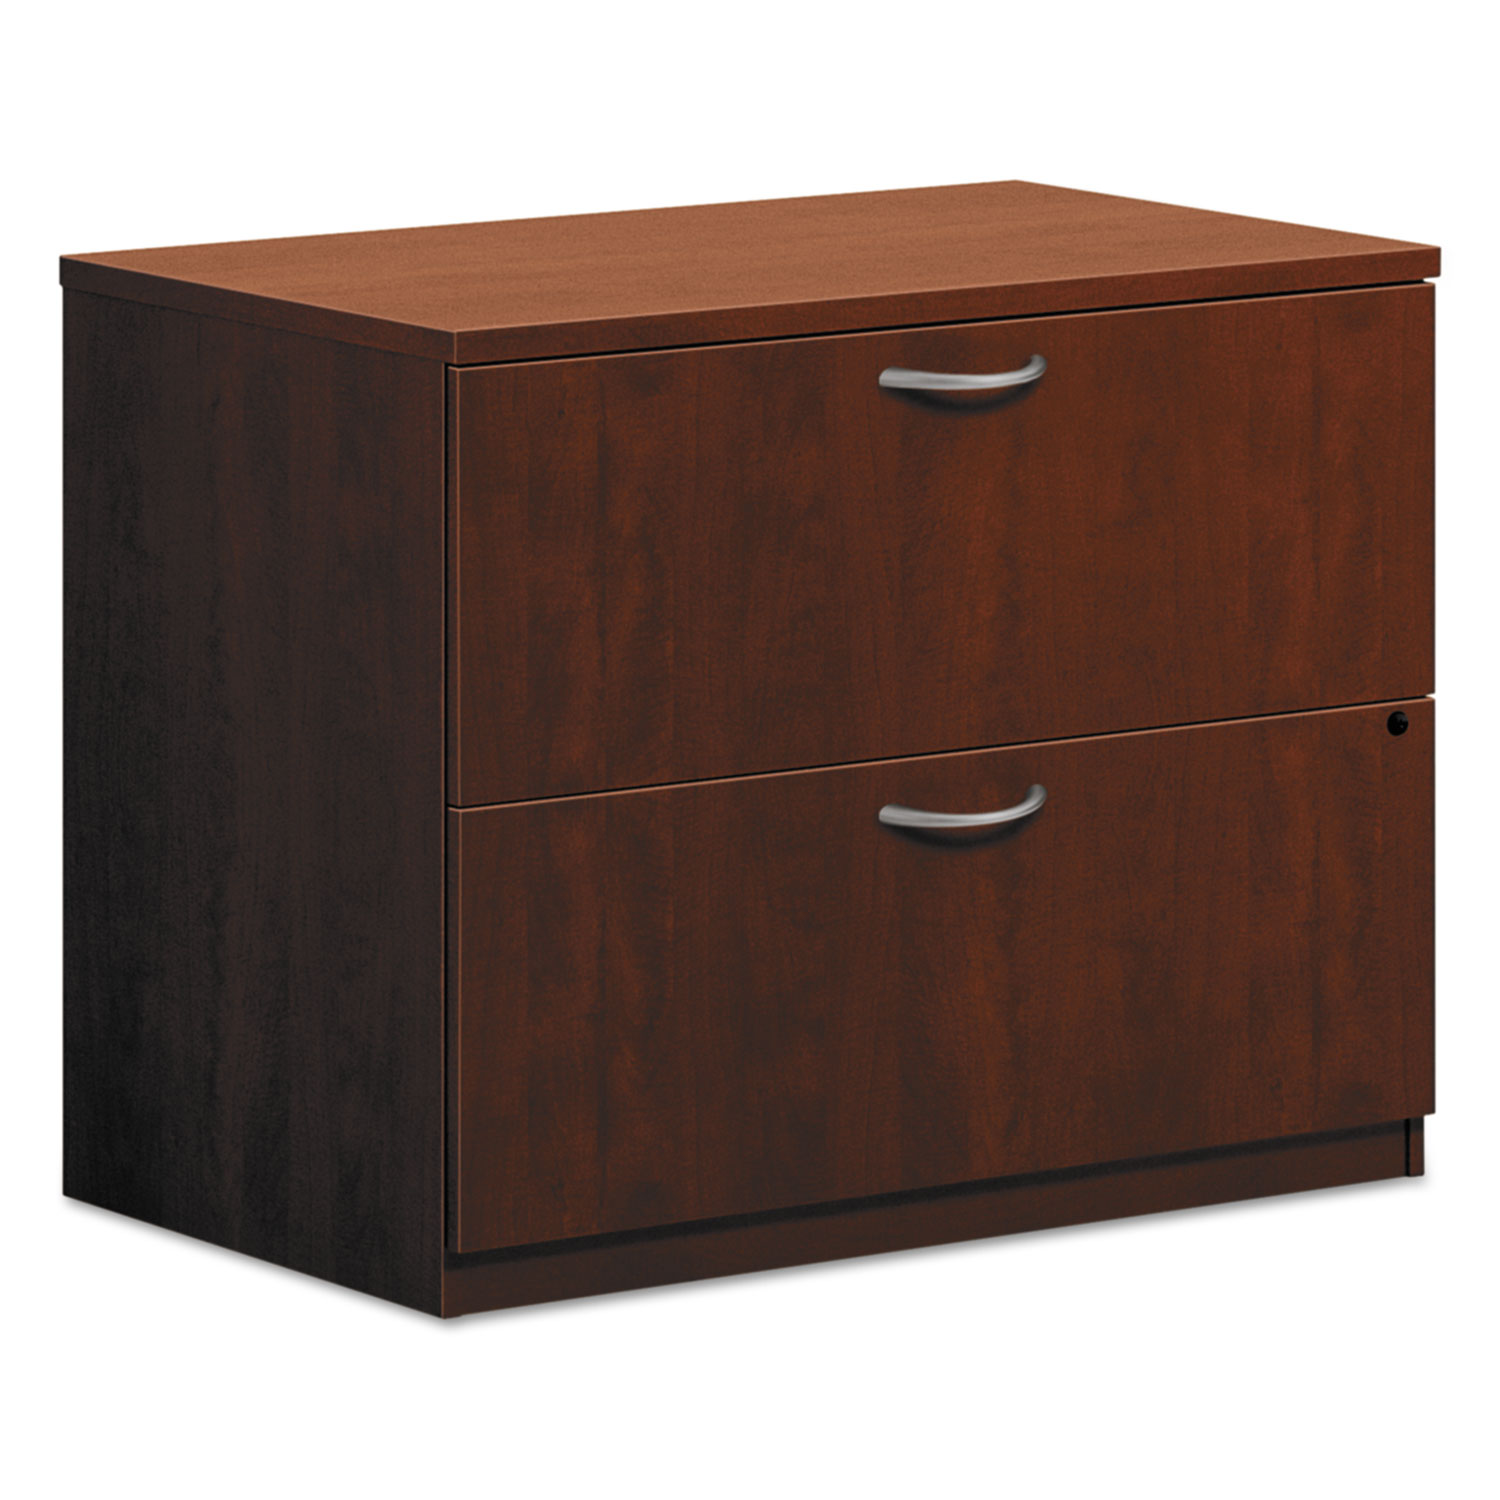 BL Laminate Two Drawer Lateral File, 35 1/2w x 22d x 29h, Medium Cherry